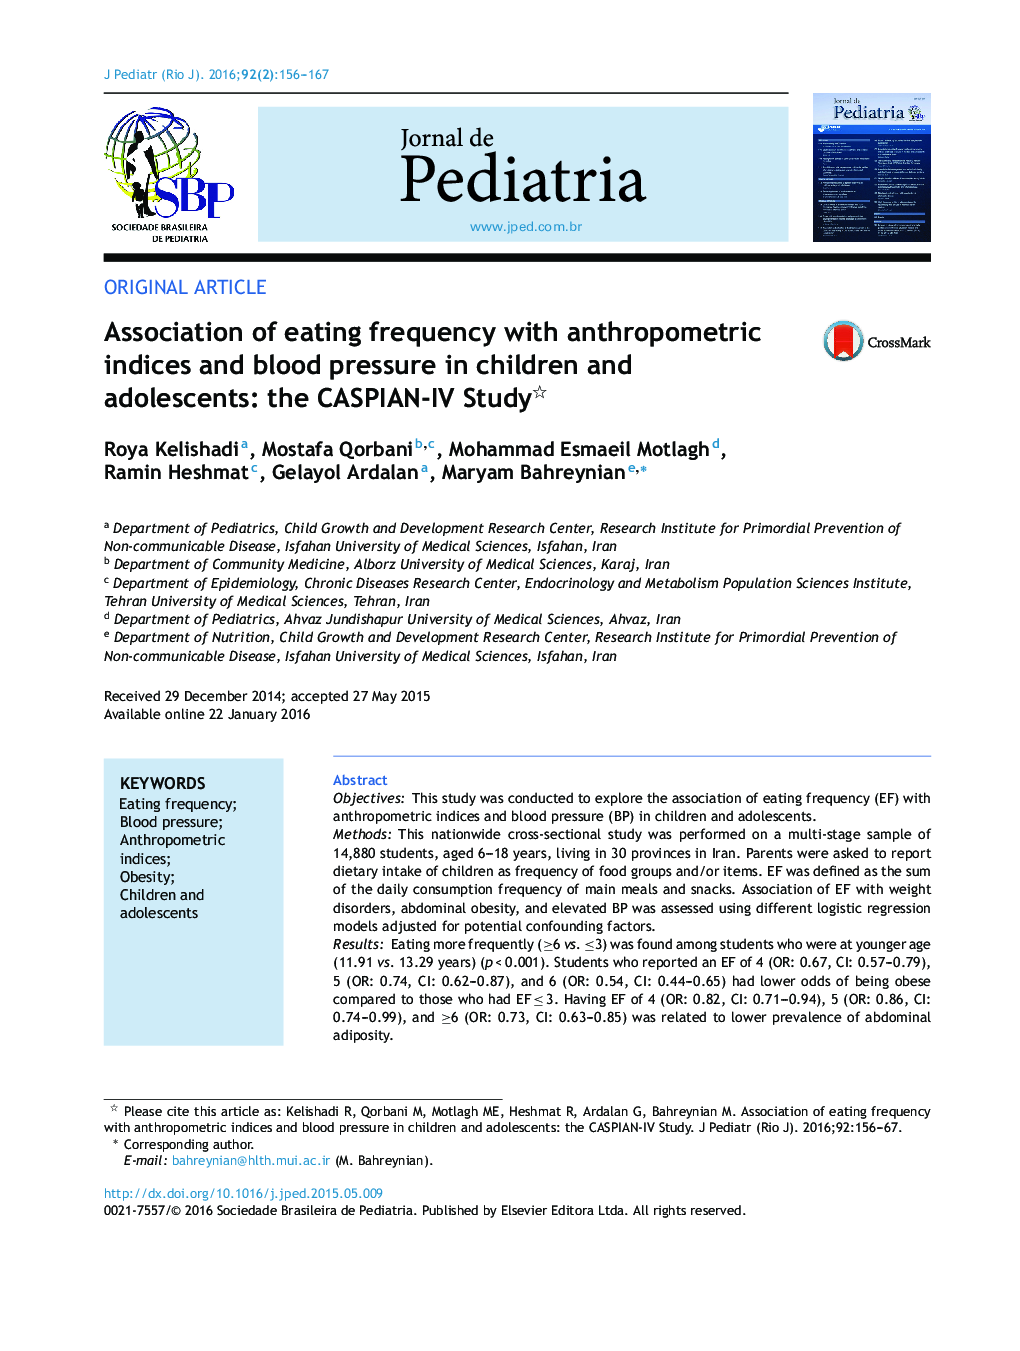 Association of eating frequency with anthropometric indices and blood pressure in children and adolescents: the CASPIAN-IV Study 